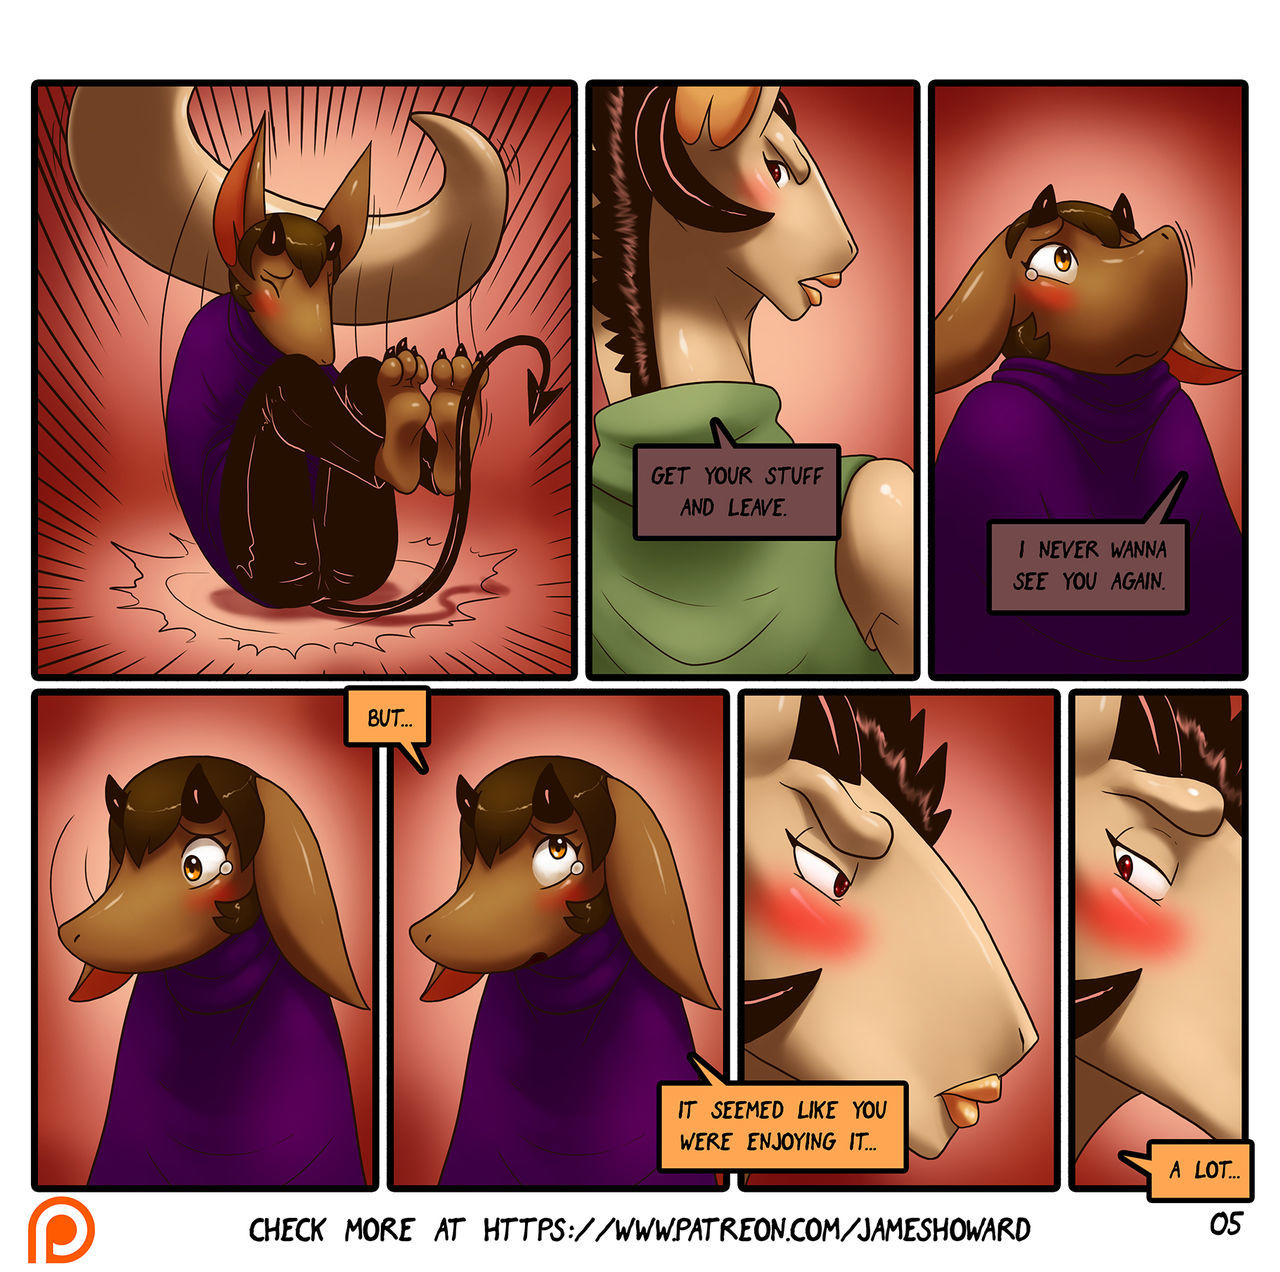 Vore Story Ch. 3 - Punishment - James Howard page 7